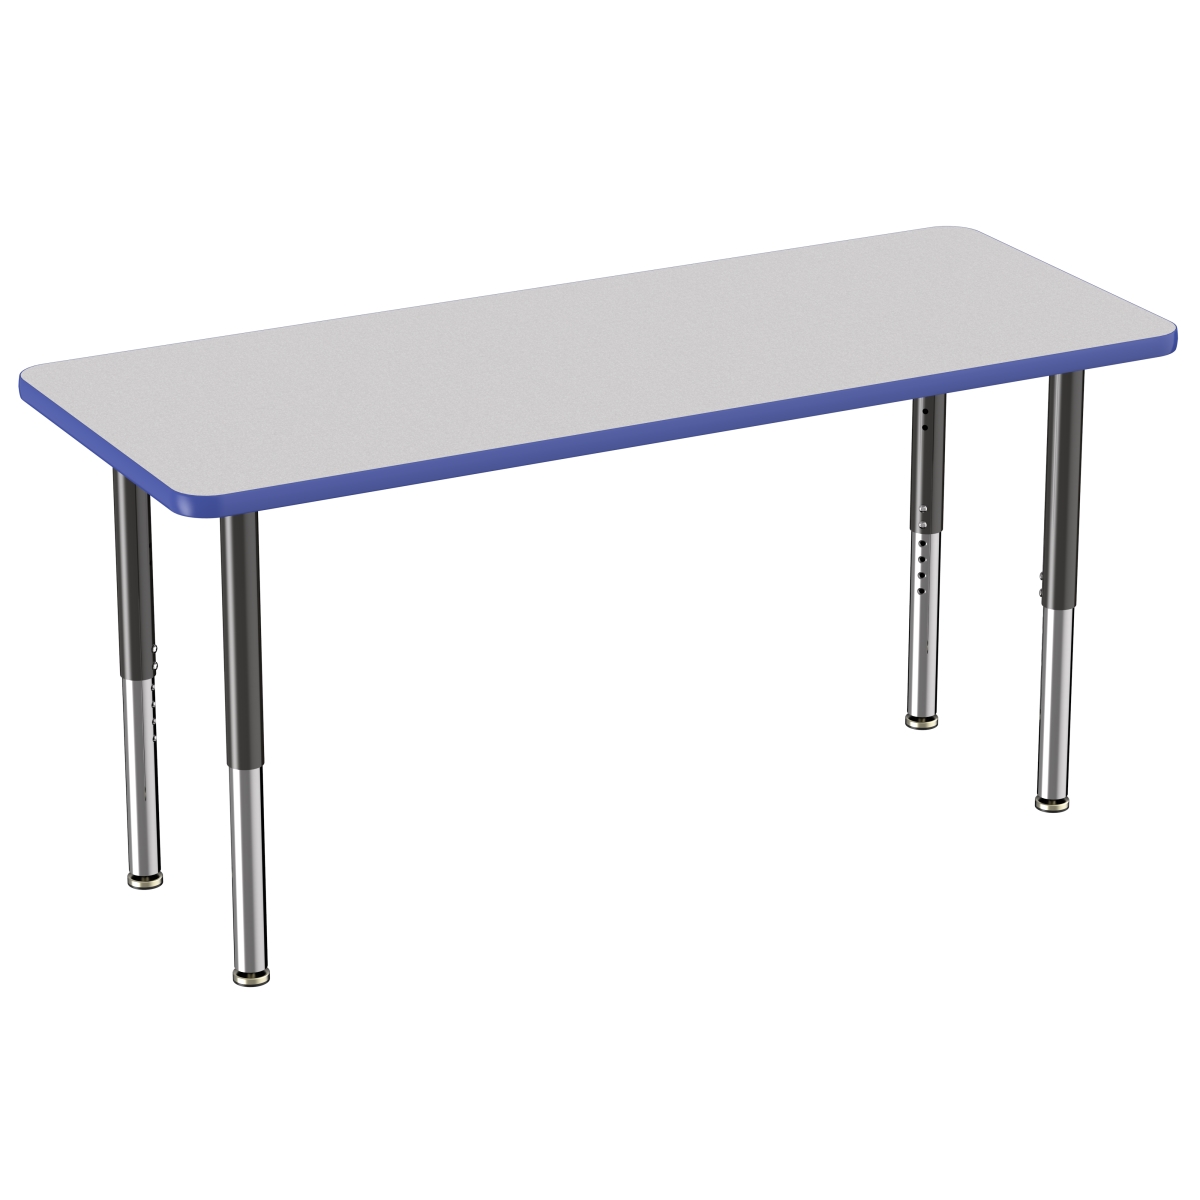 10014-gybl 24 X 60 In. Rectangle T-mold Adjustable Activity Table With Super Leg - Grey & Blue